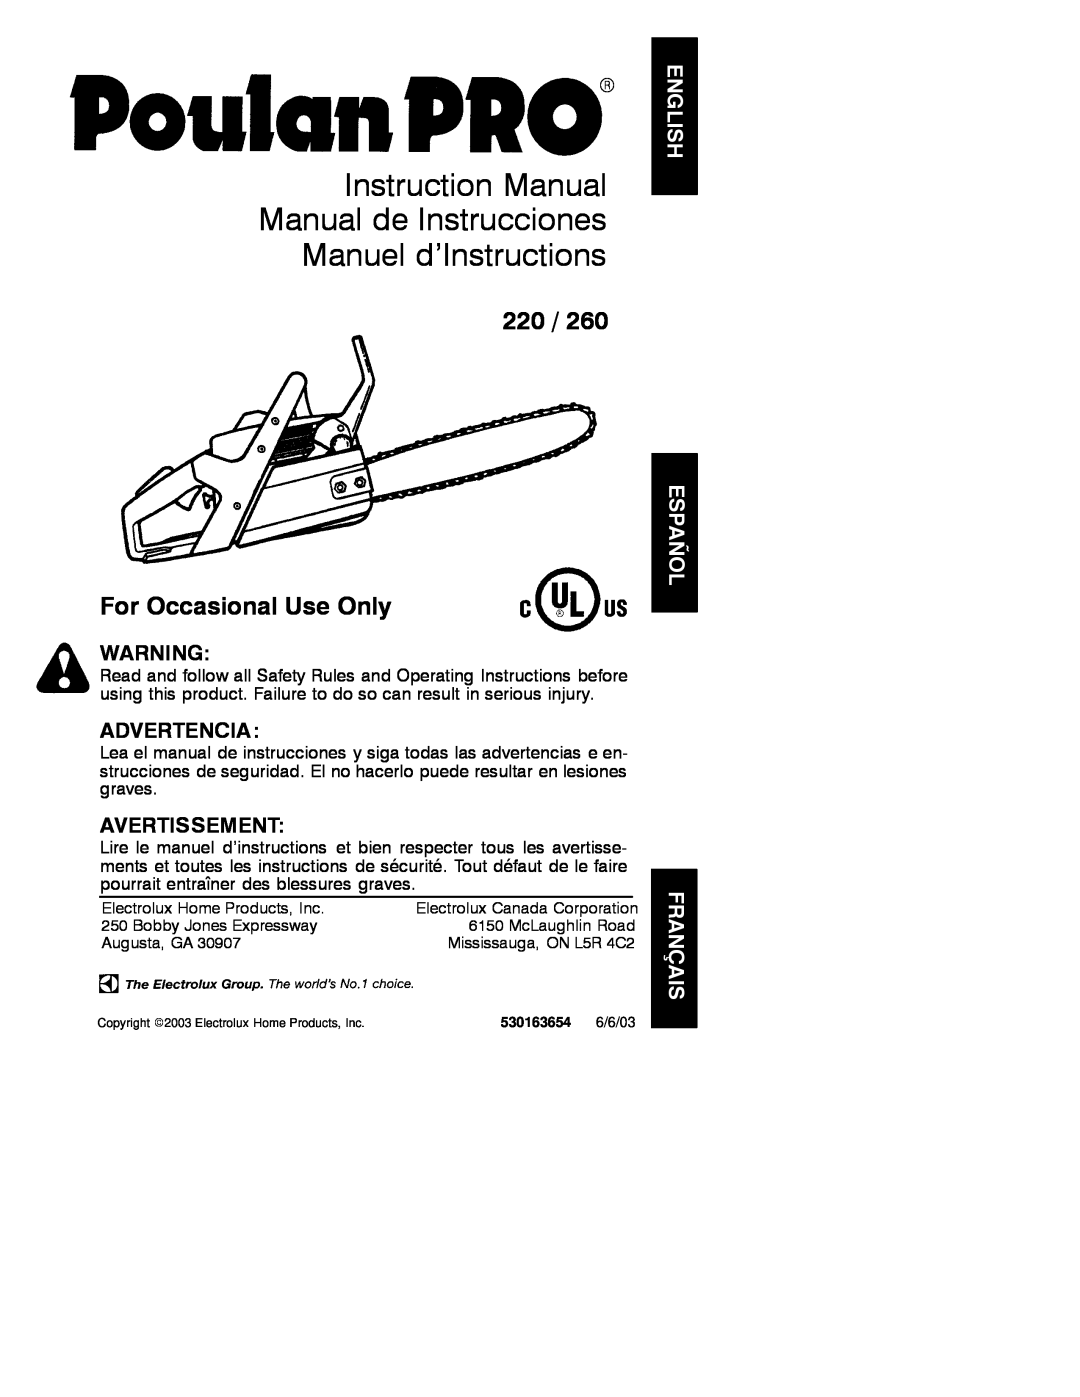 Poulan 530163654 instruction manual For Occasional Use Only, Advertencia, Avertissement 